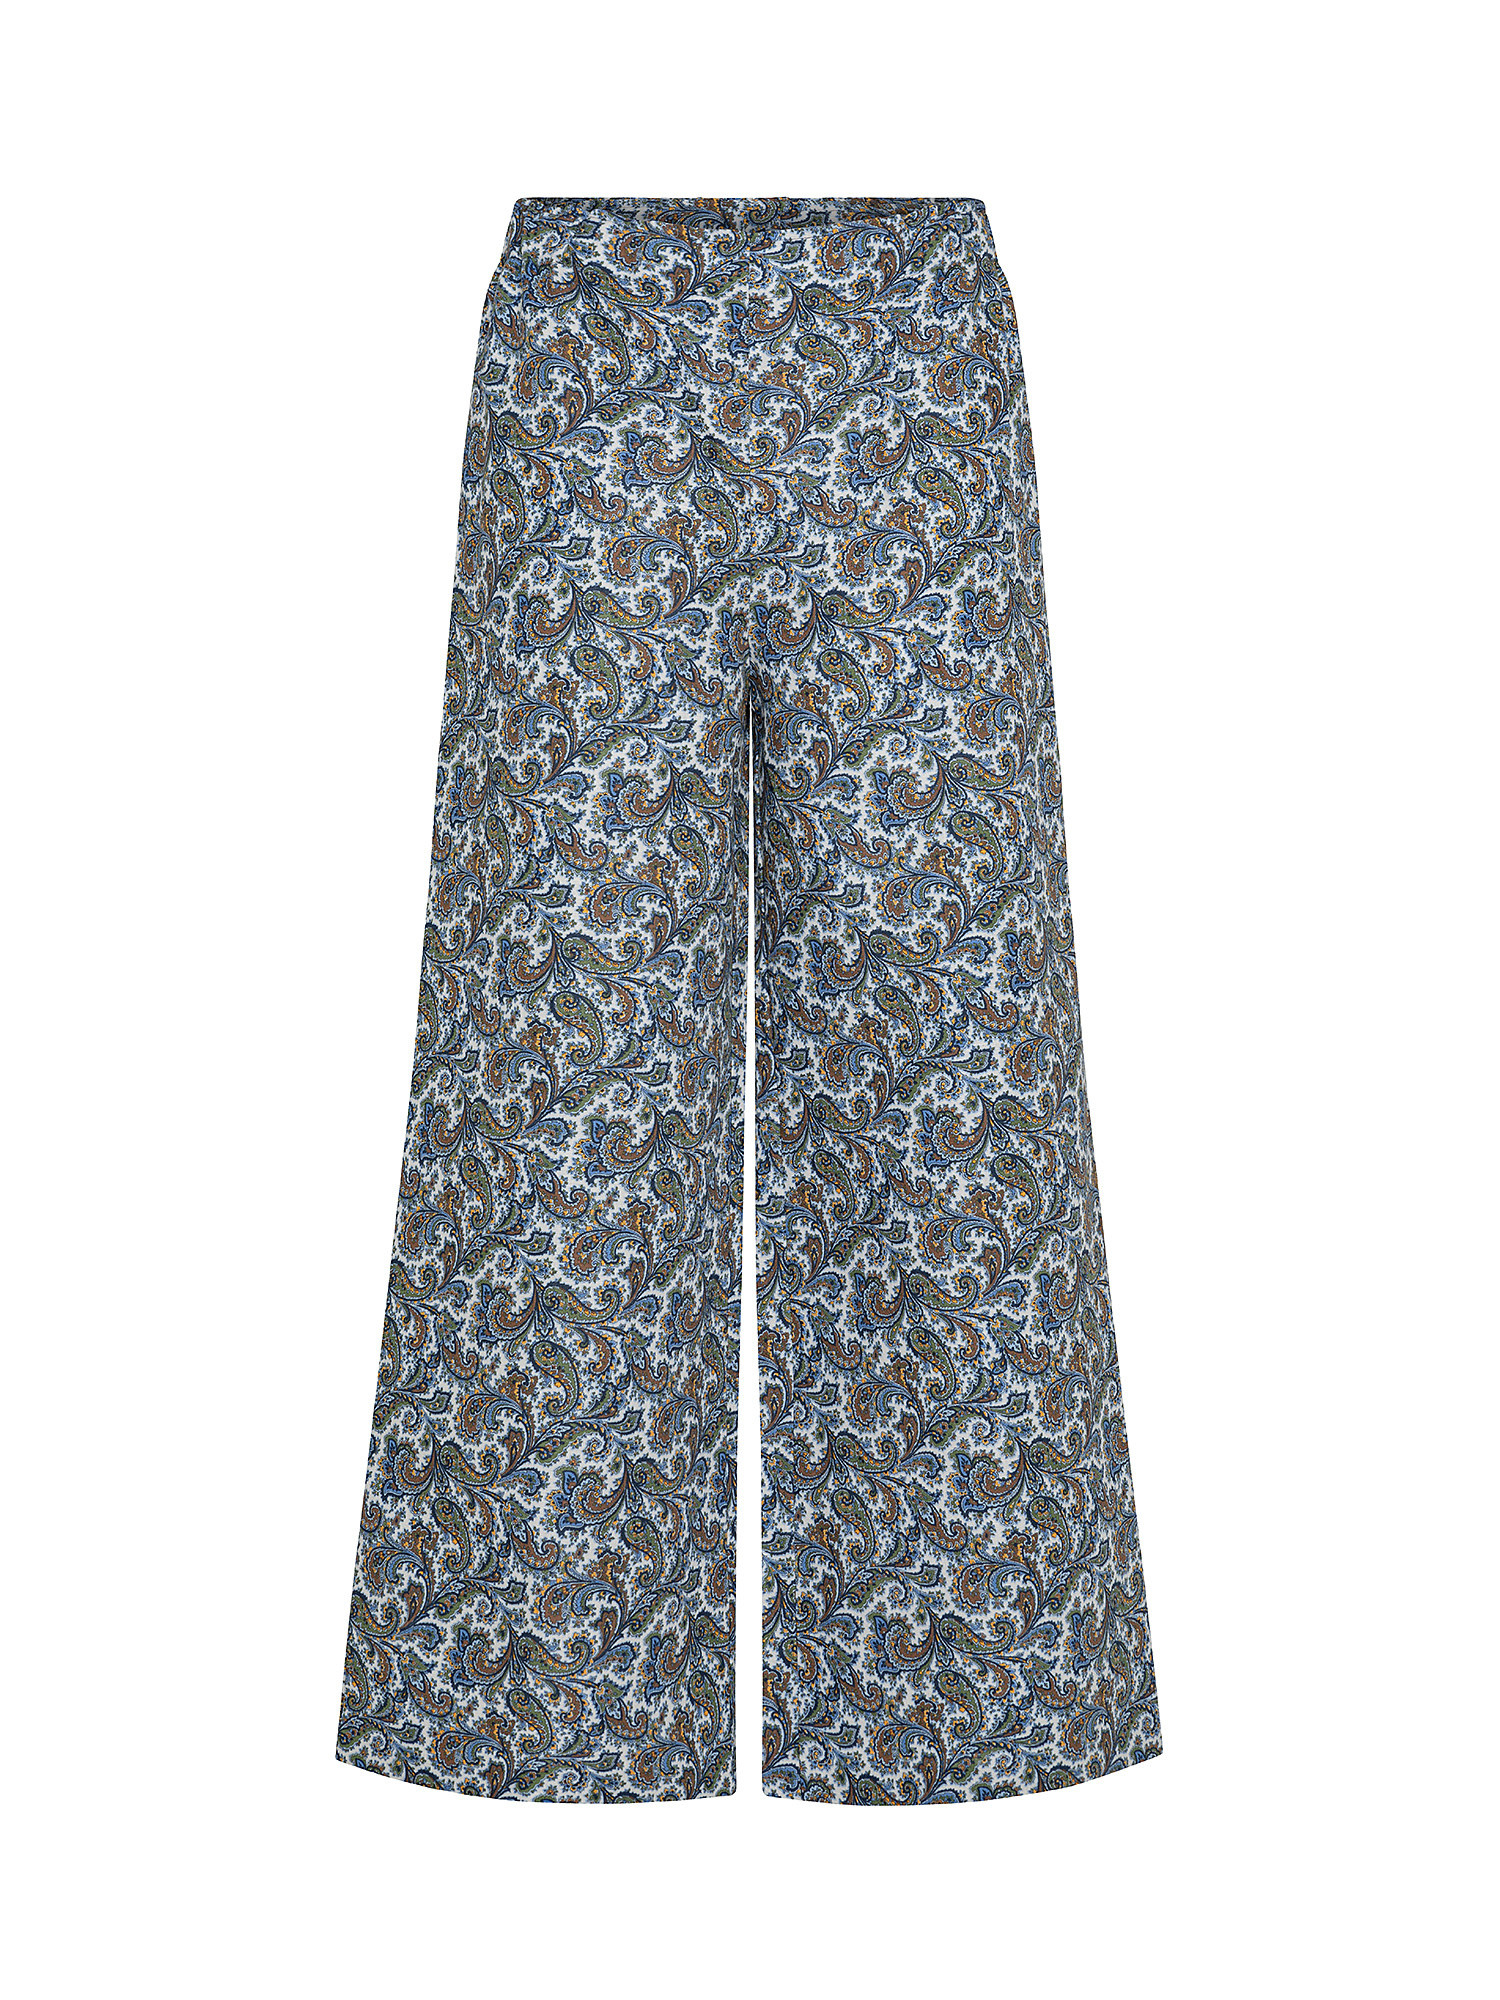 Cashmere patterned trousers, Multicolor, large image number 0